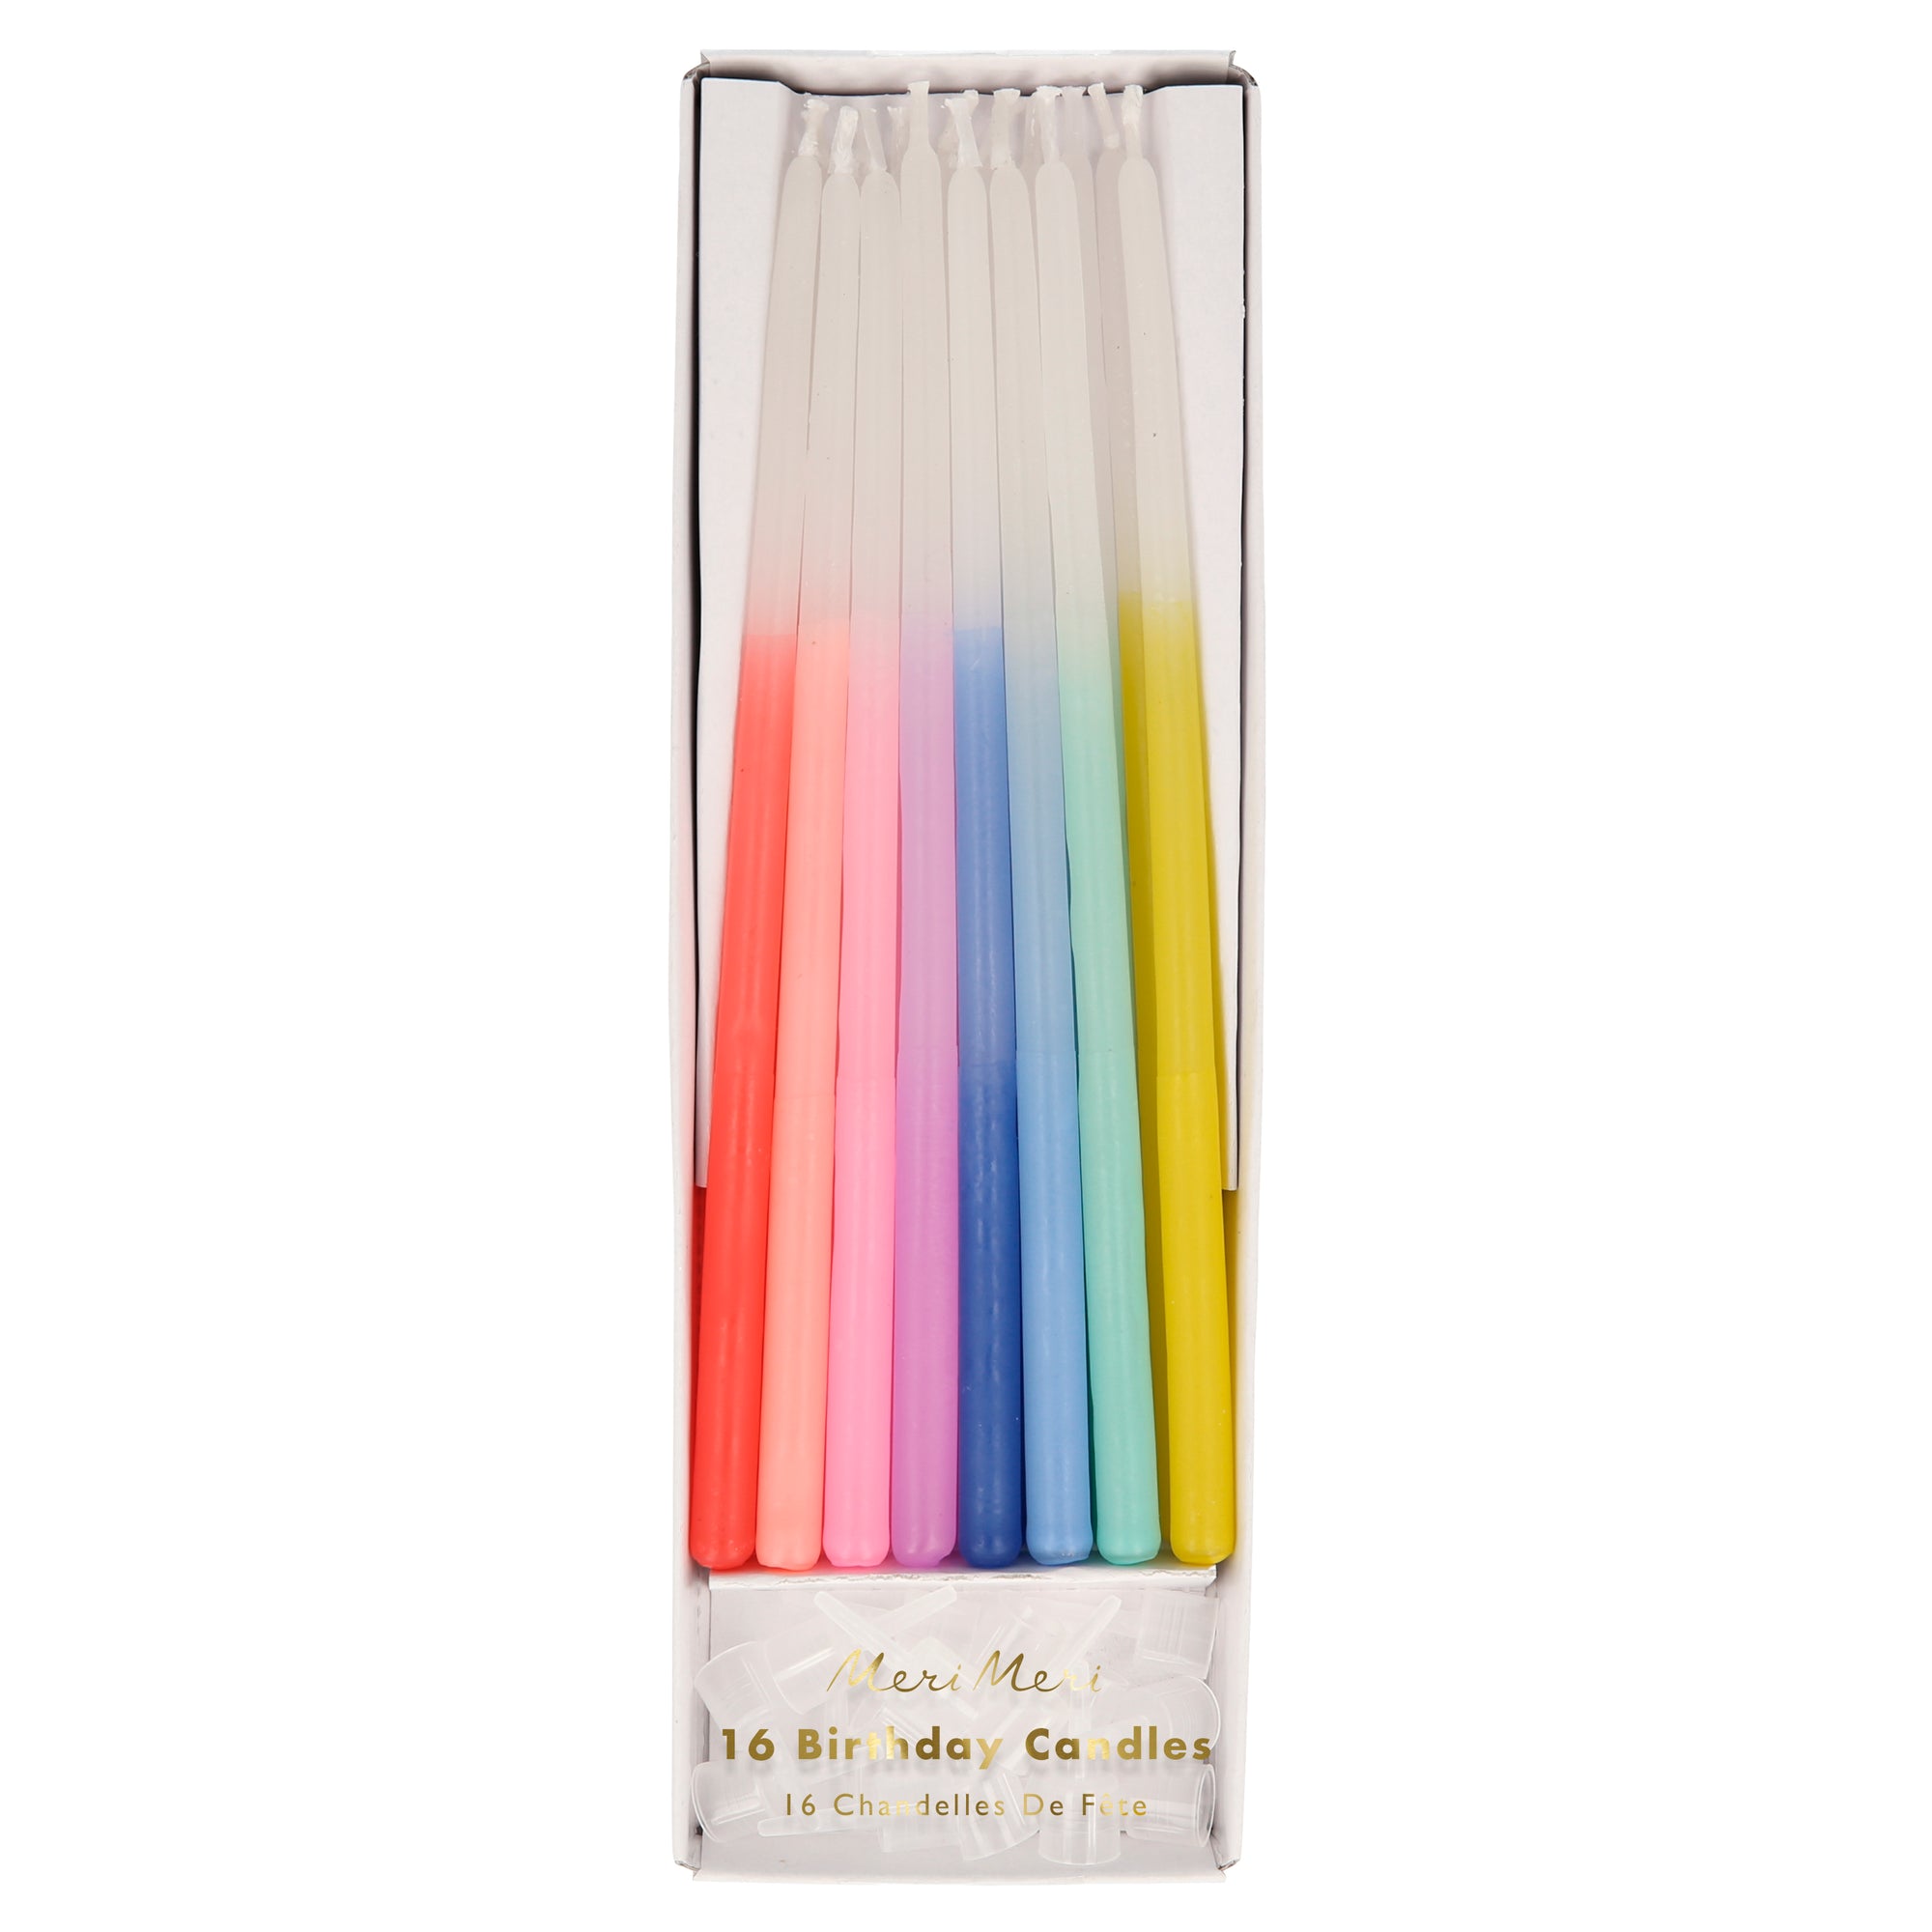 Rainbow tapered birthday candels-Little Fish Co.